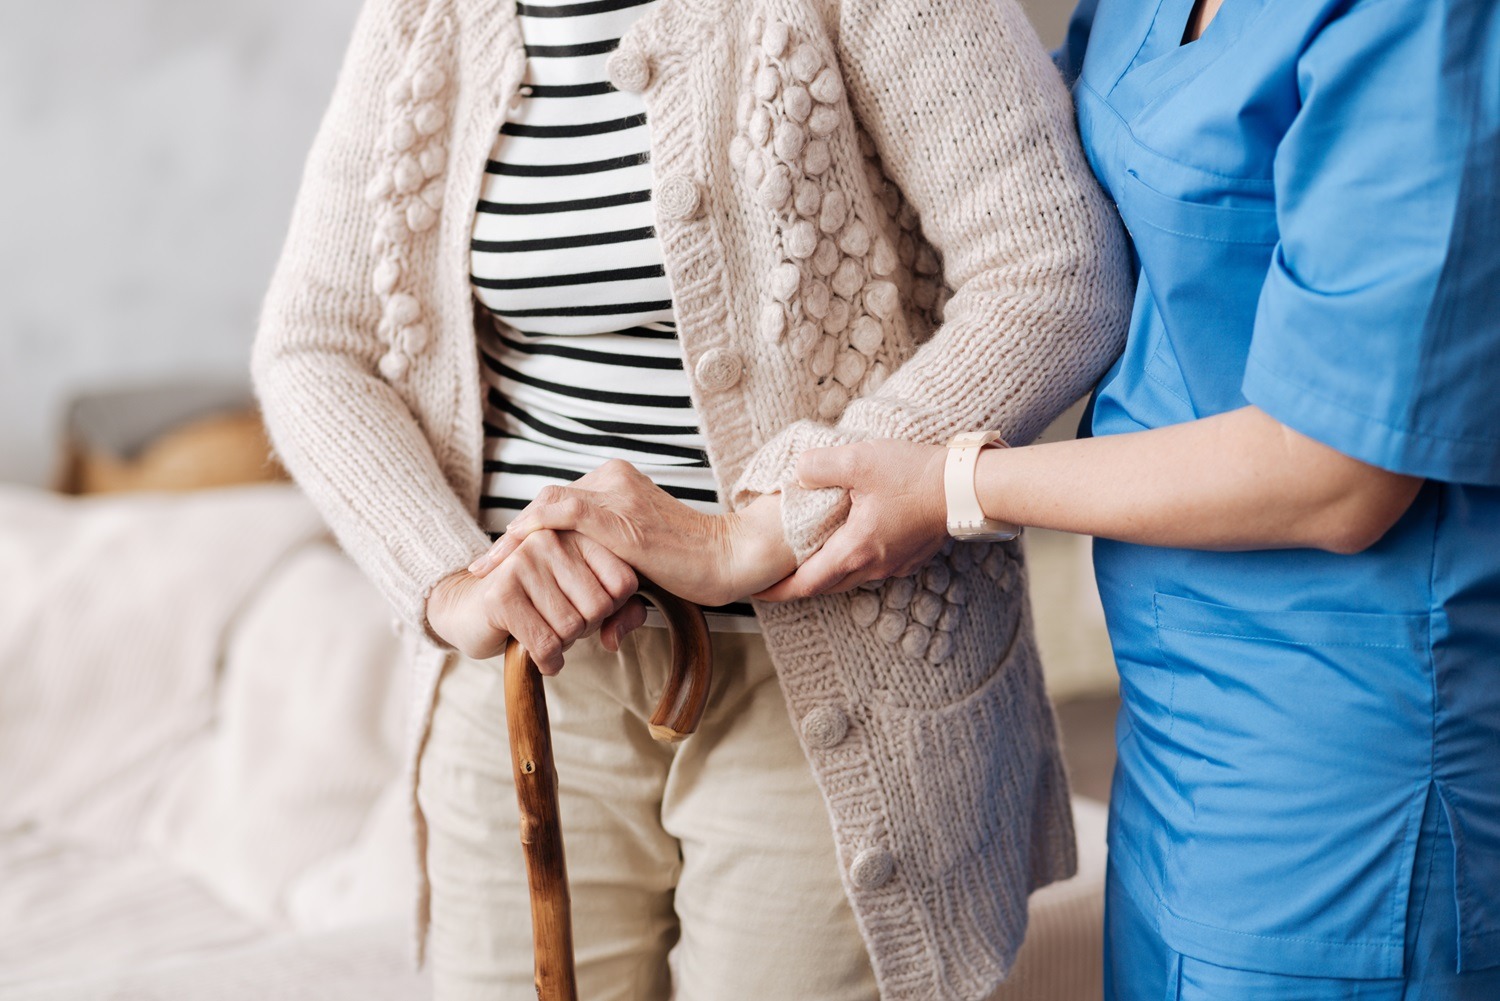 Lone worker monitoring improves home care worker safety